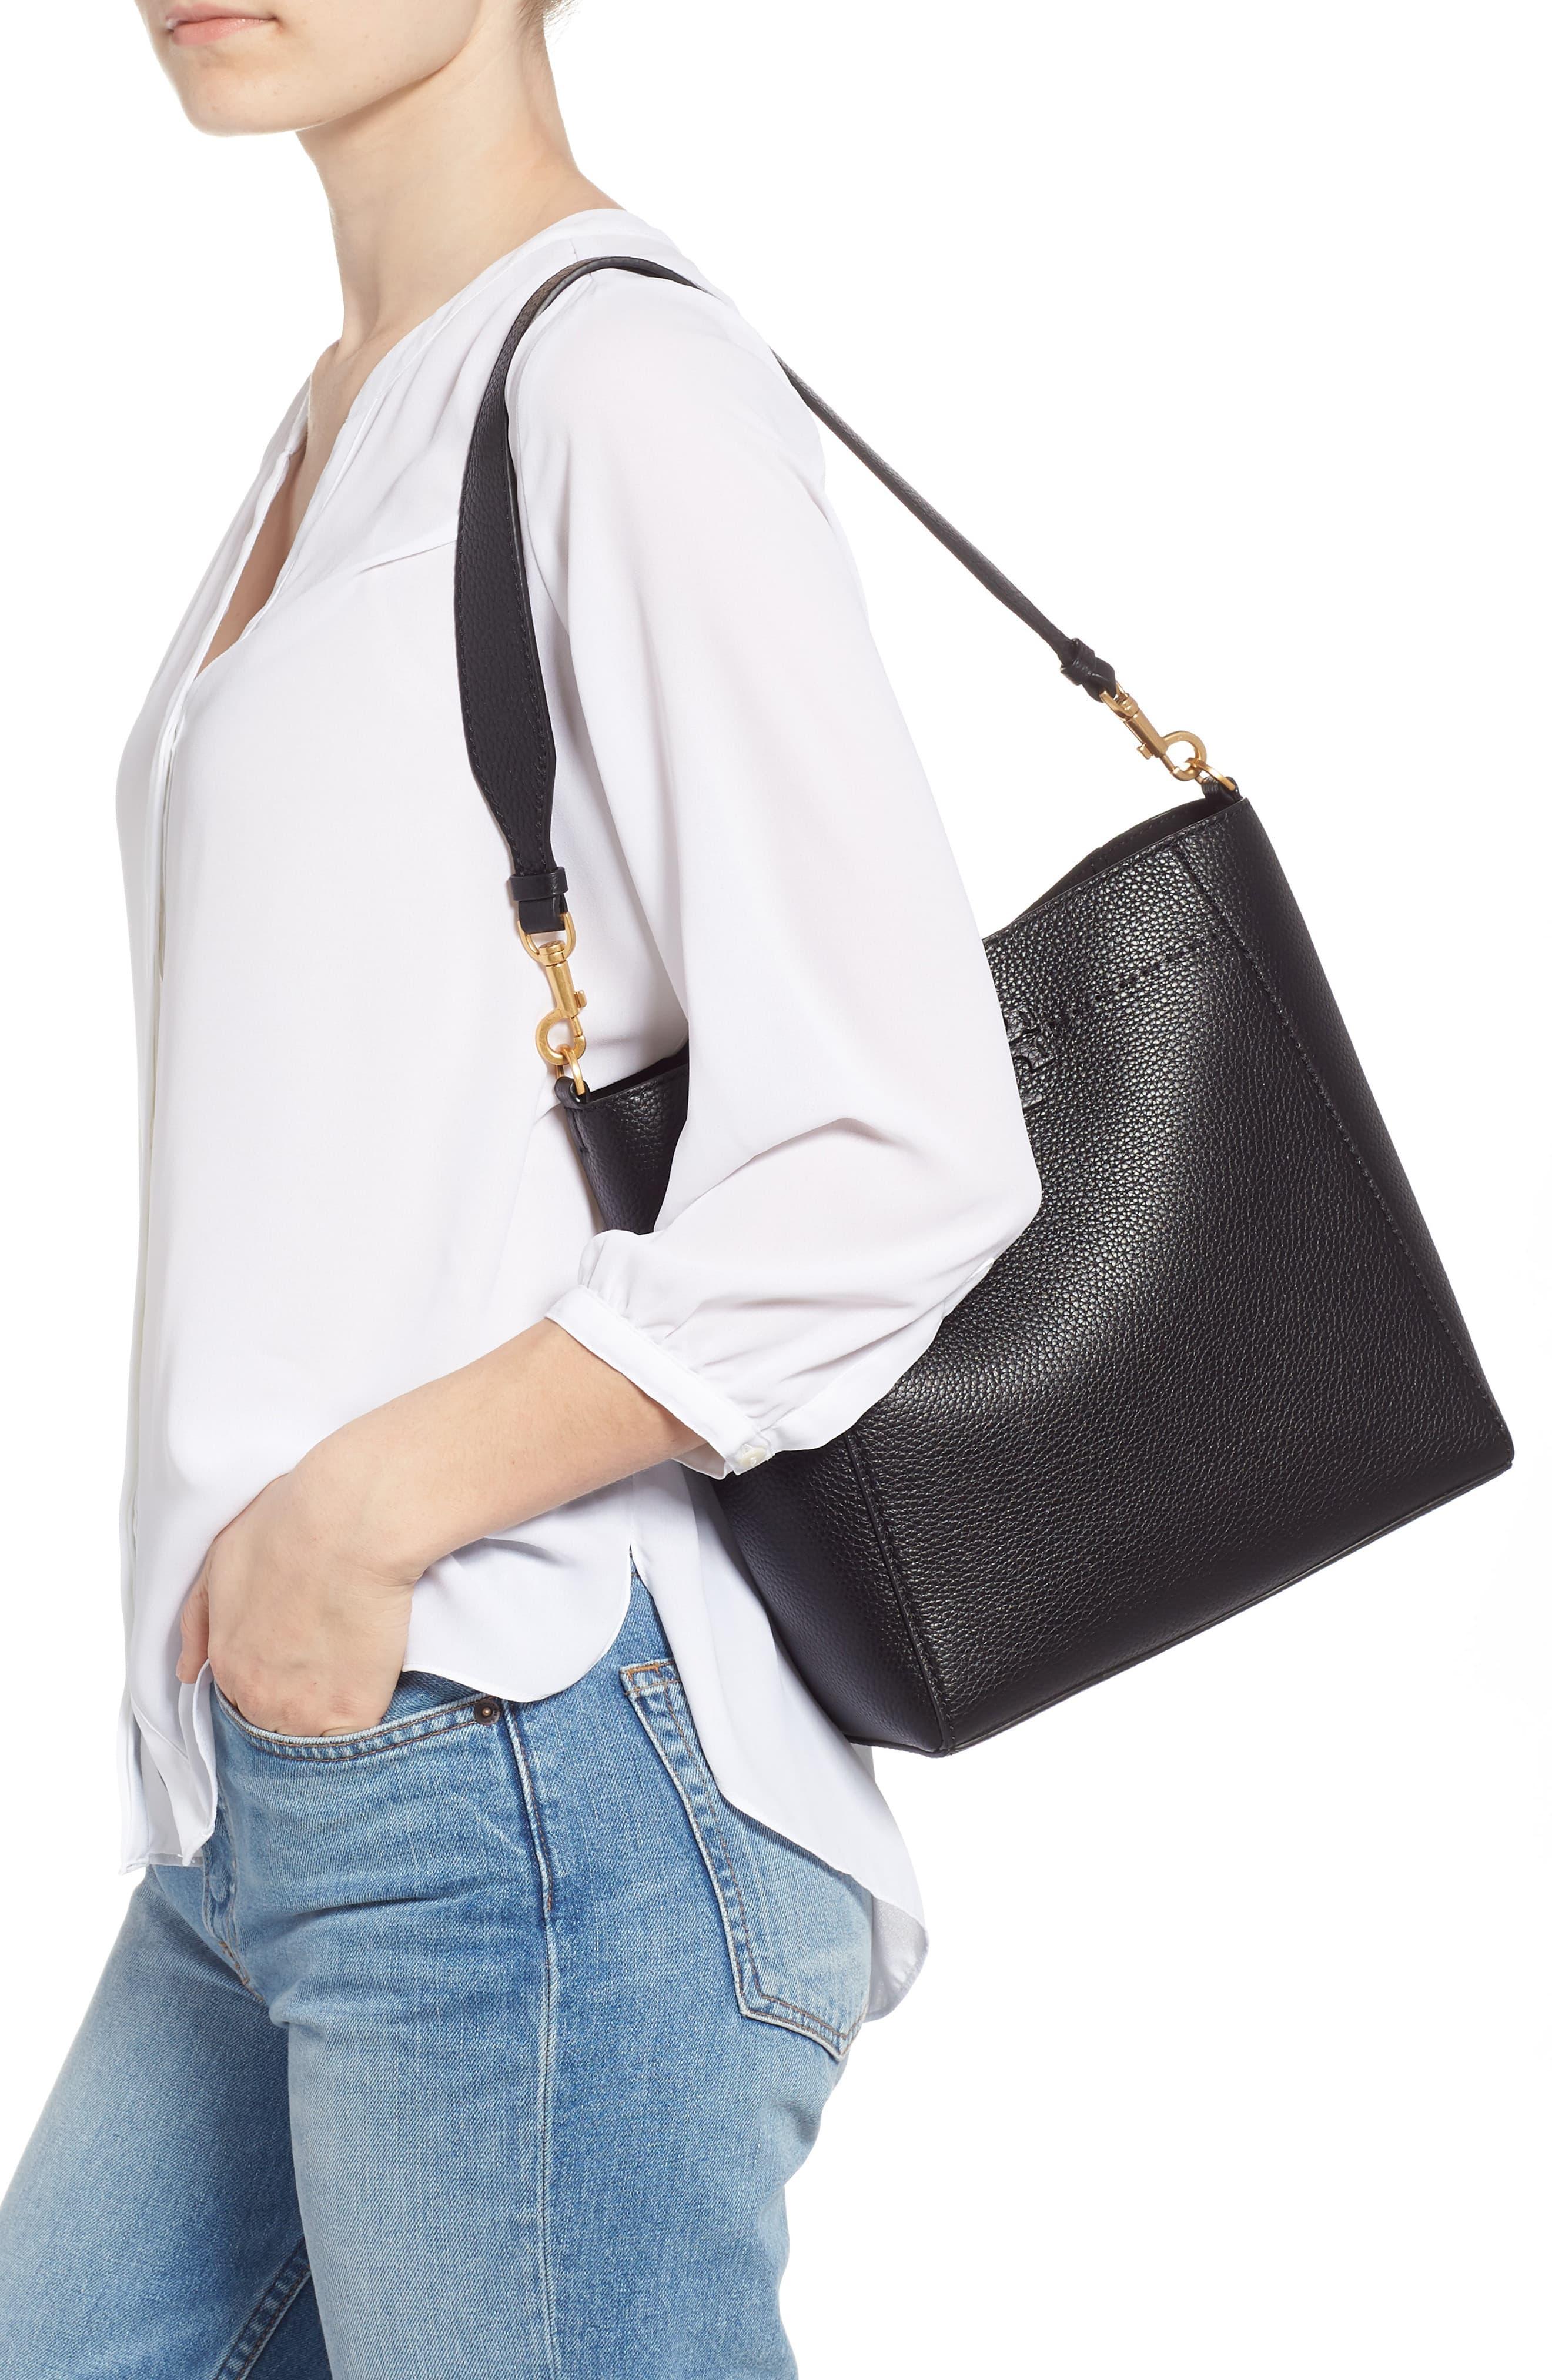 Tory Burch Mcgraw Leather Hobo in Black - Lyst